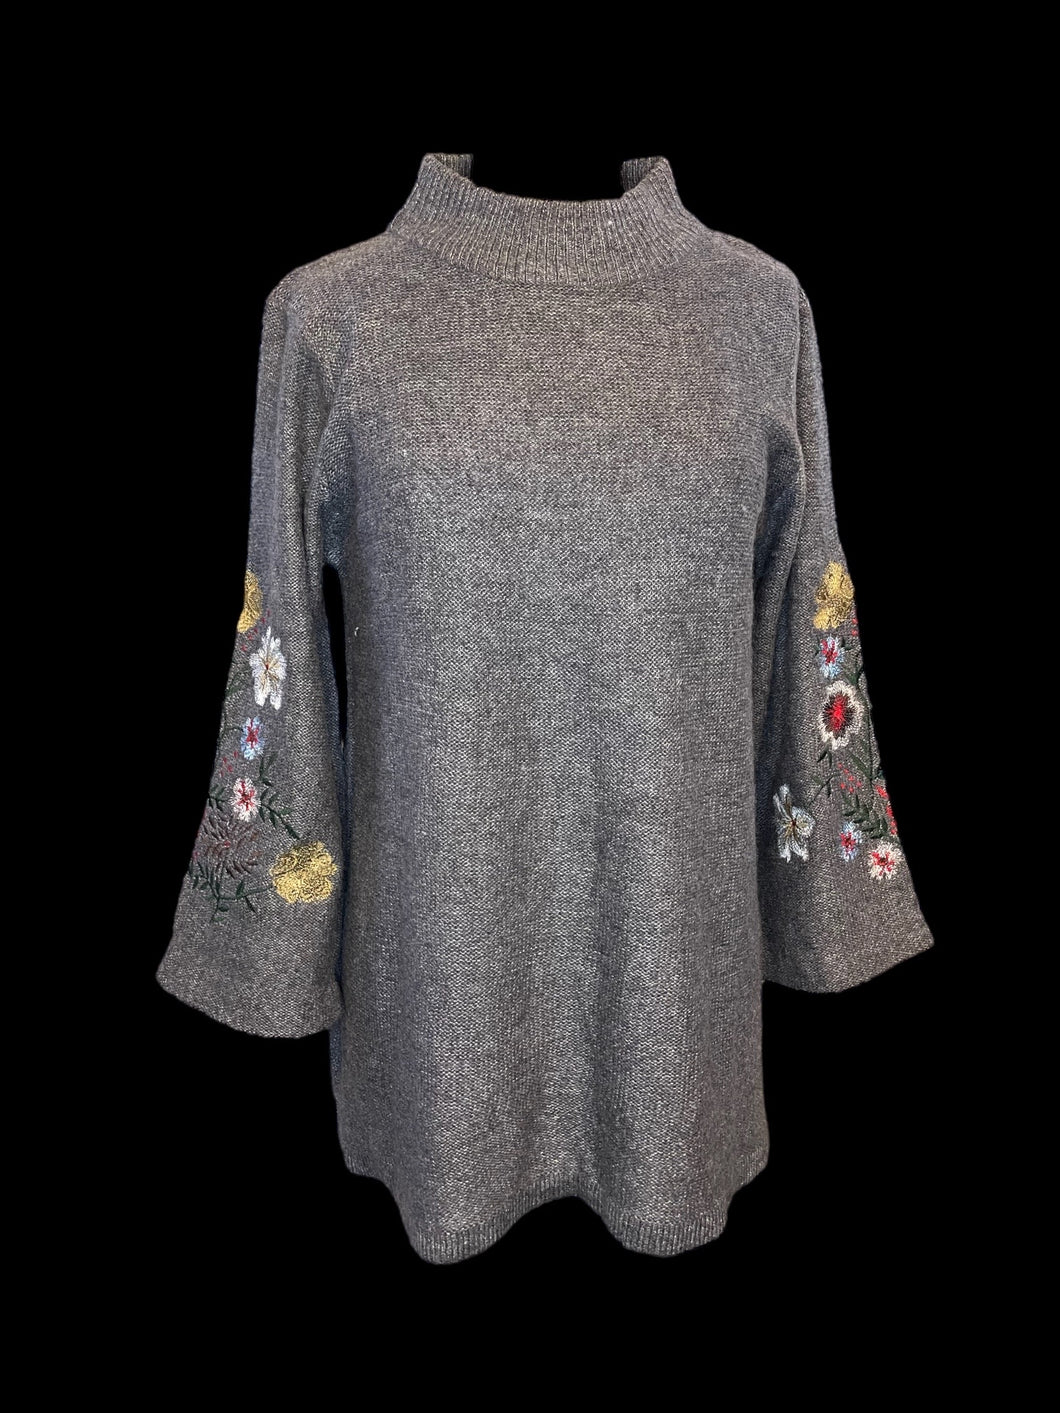 0X Grey 3/4 wide sleeve high neckline sweater w/ multicolor floral embroidery